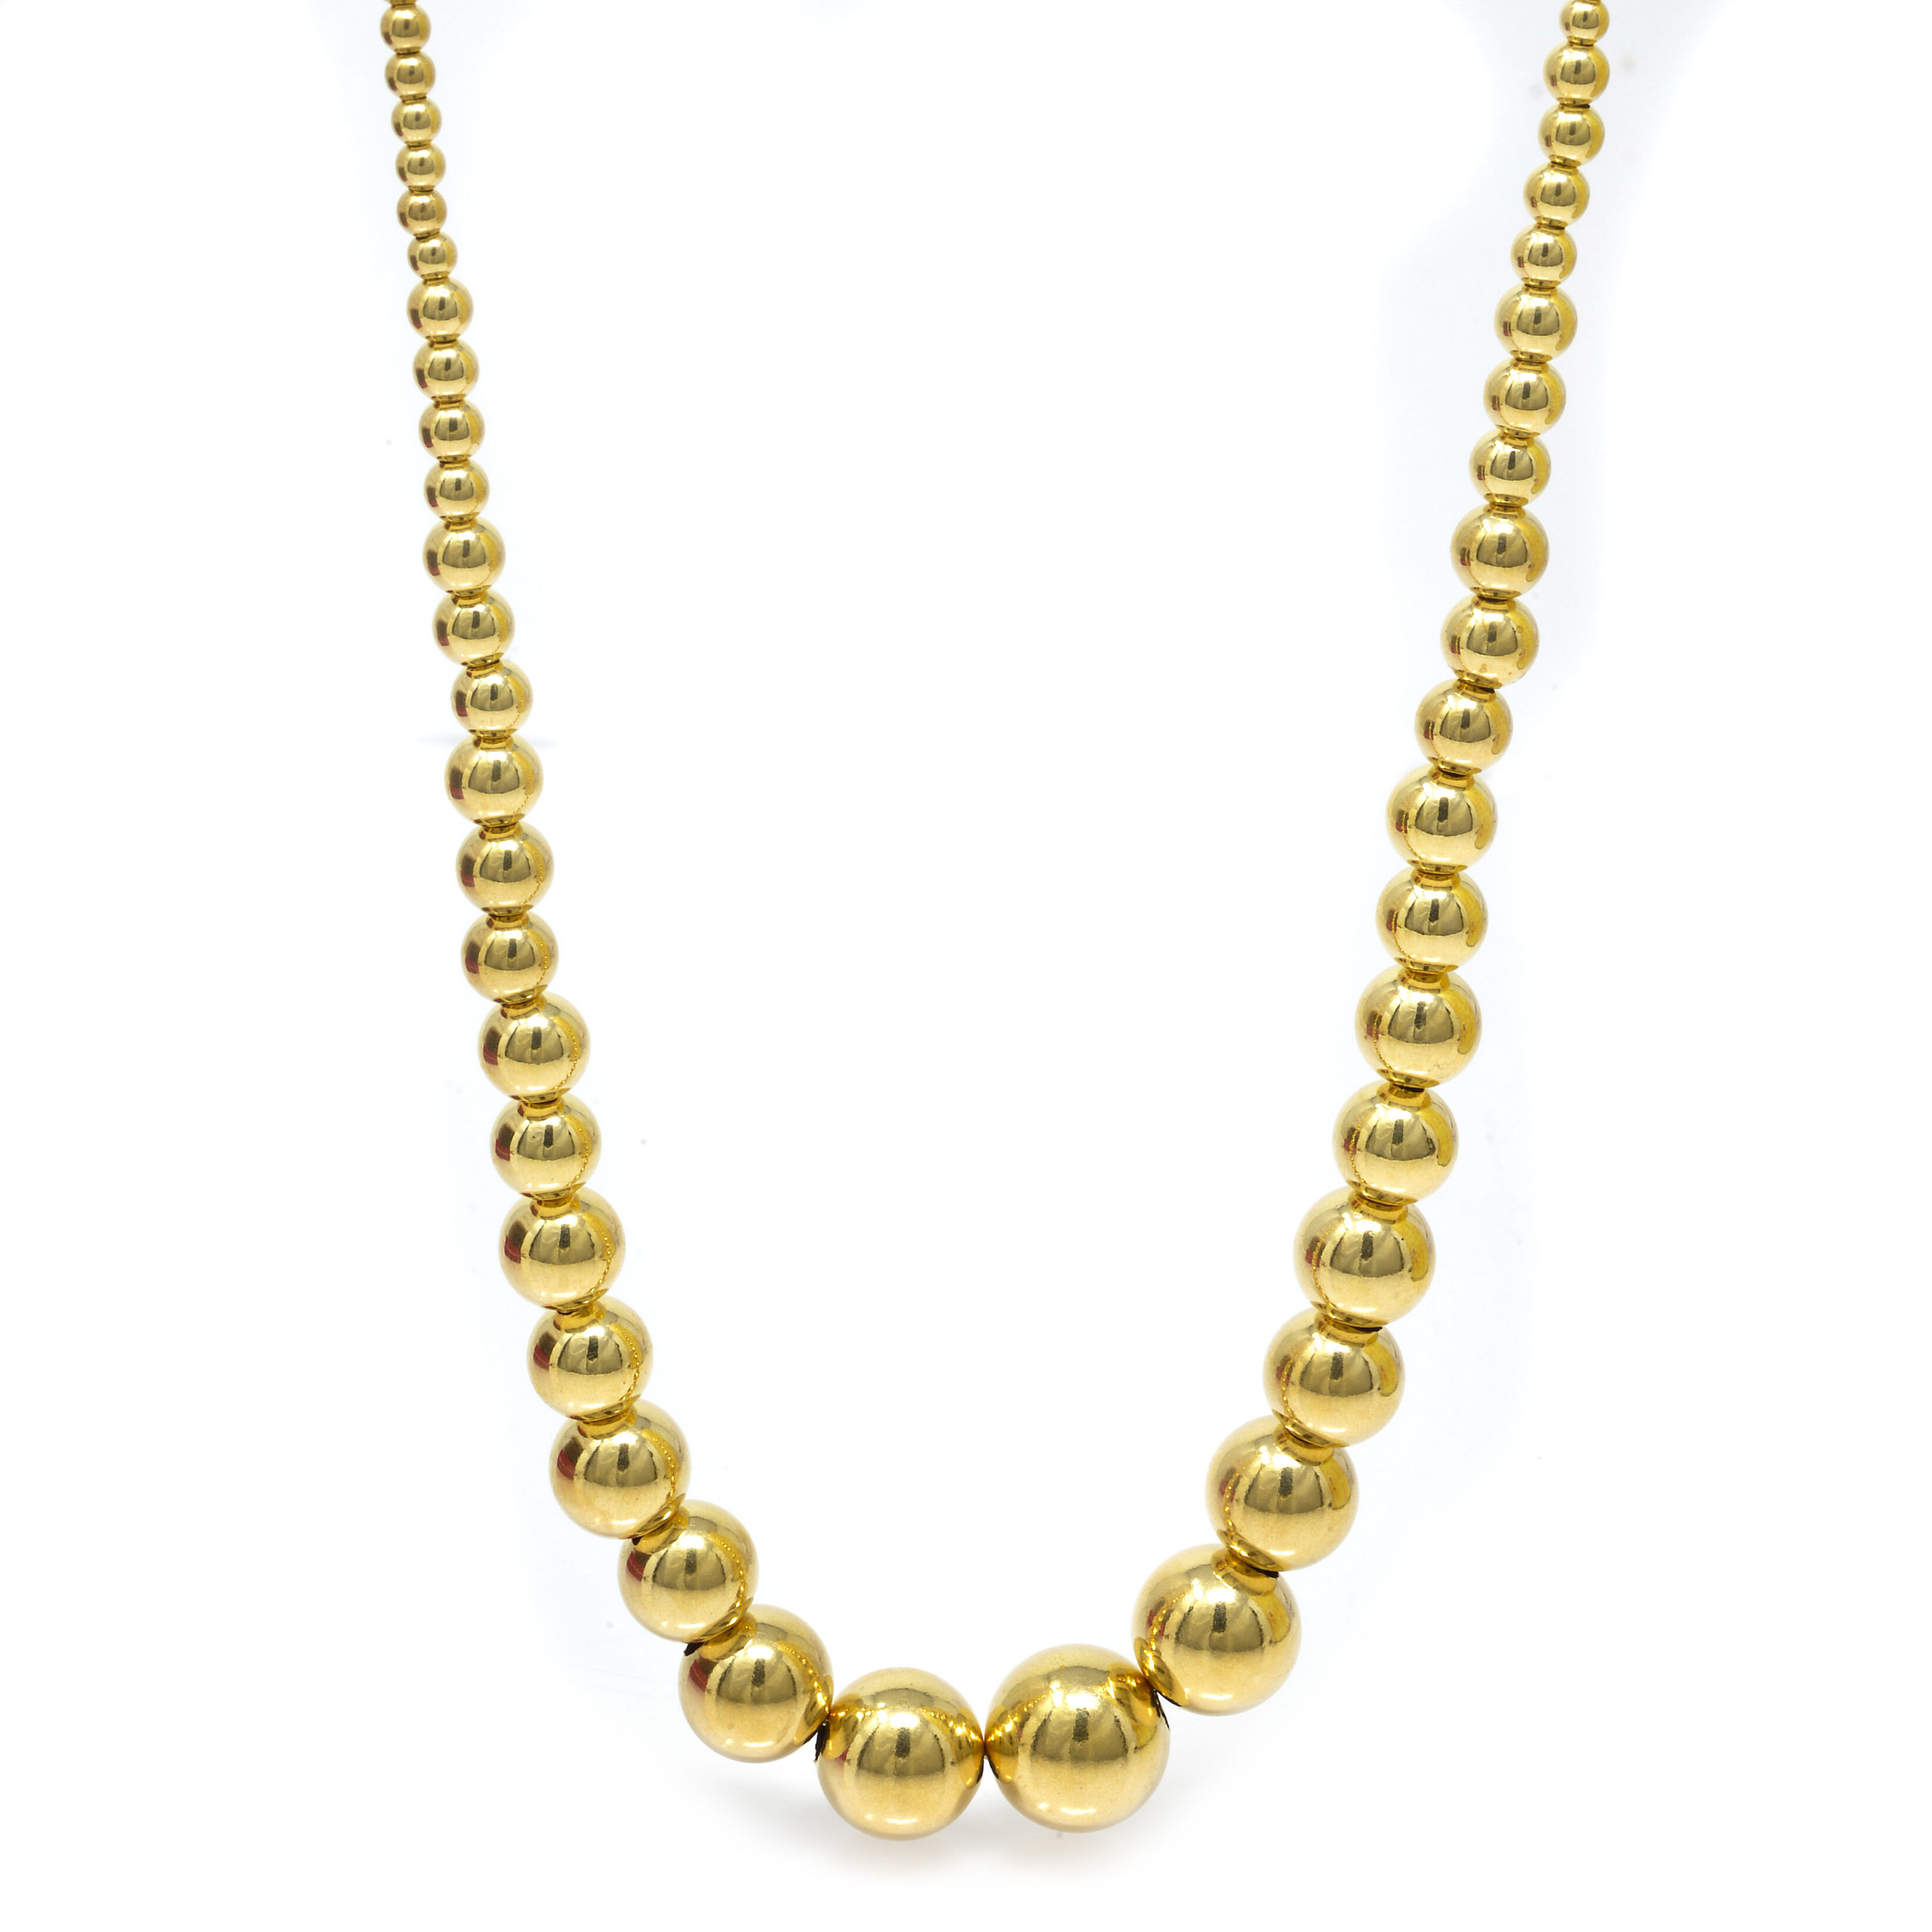 Collier Or 18 Carats grain d'or chute 12mm 45cm